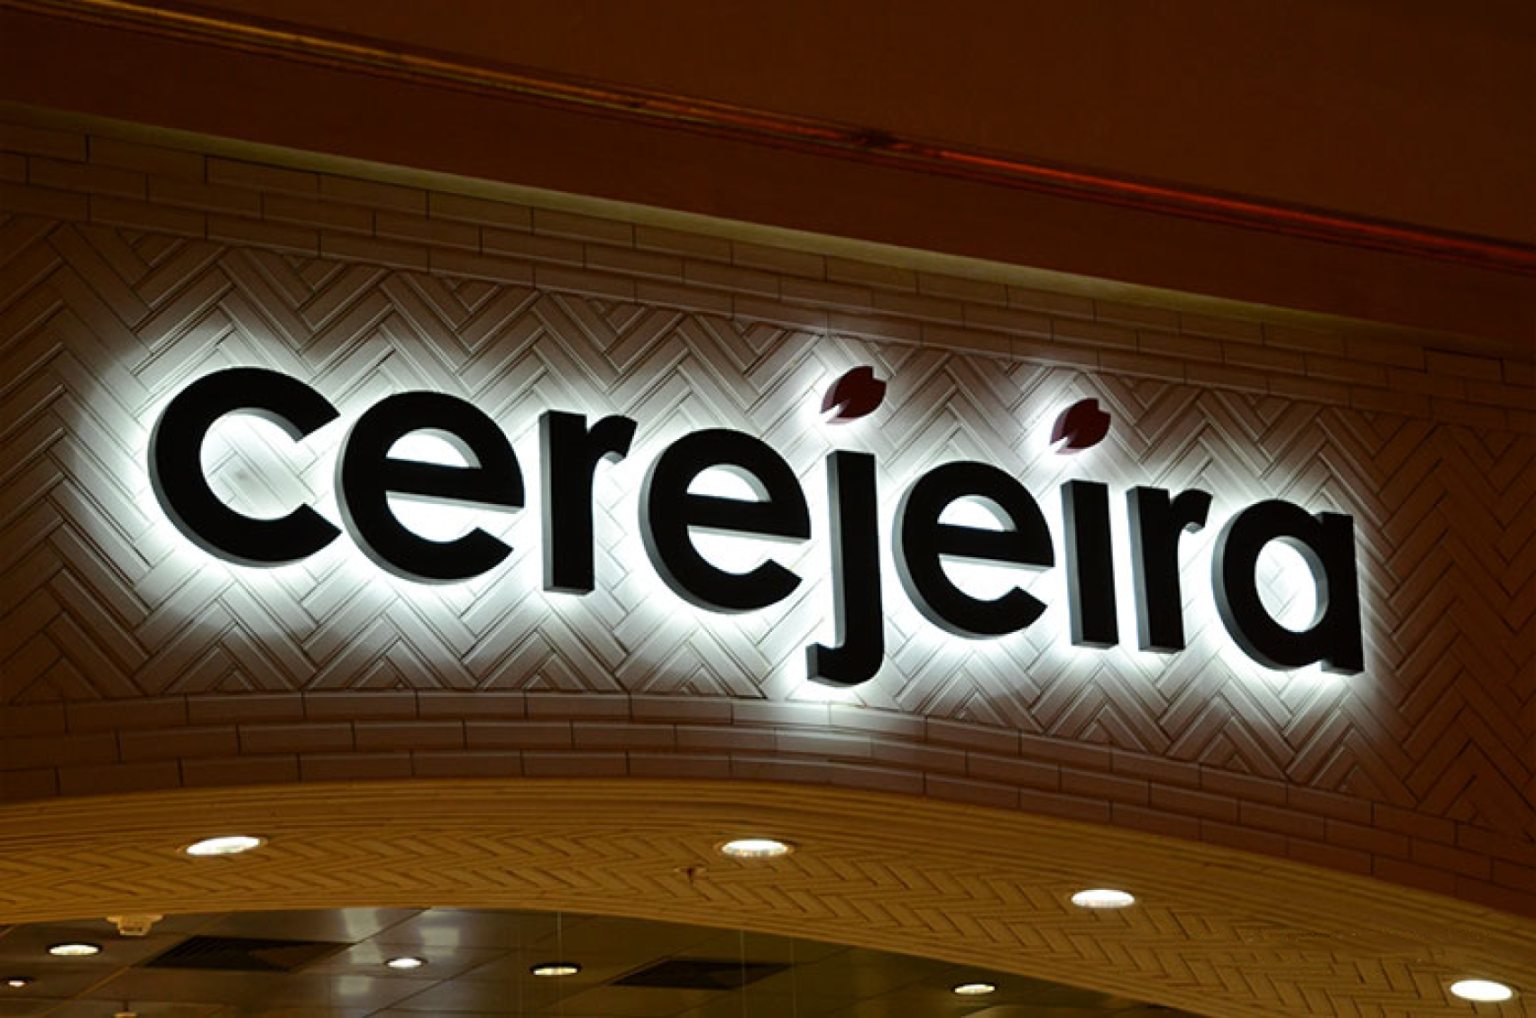 3d-led-backlit-signs-with-painted-stainless-steel-letter-shell-for-cerejeira